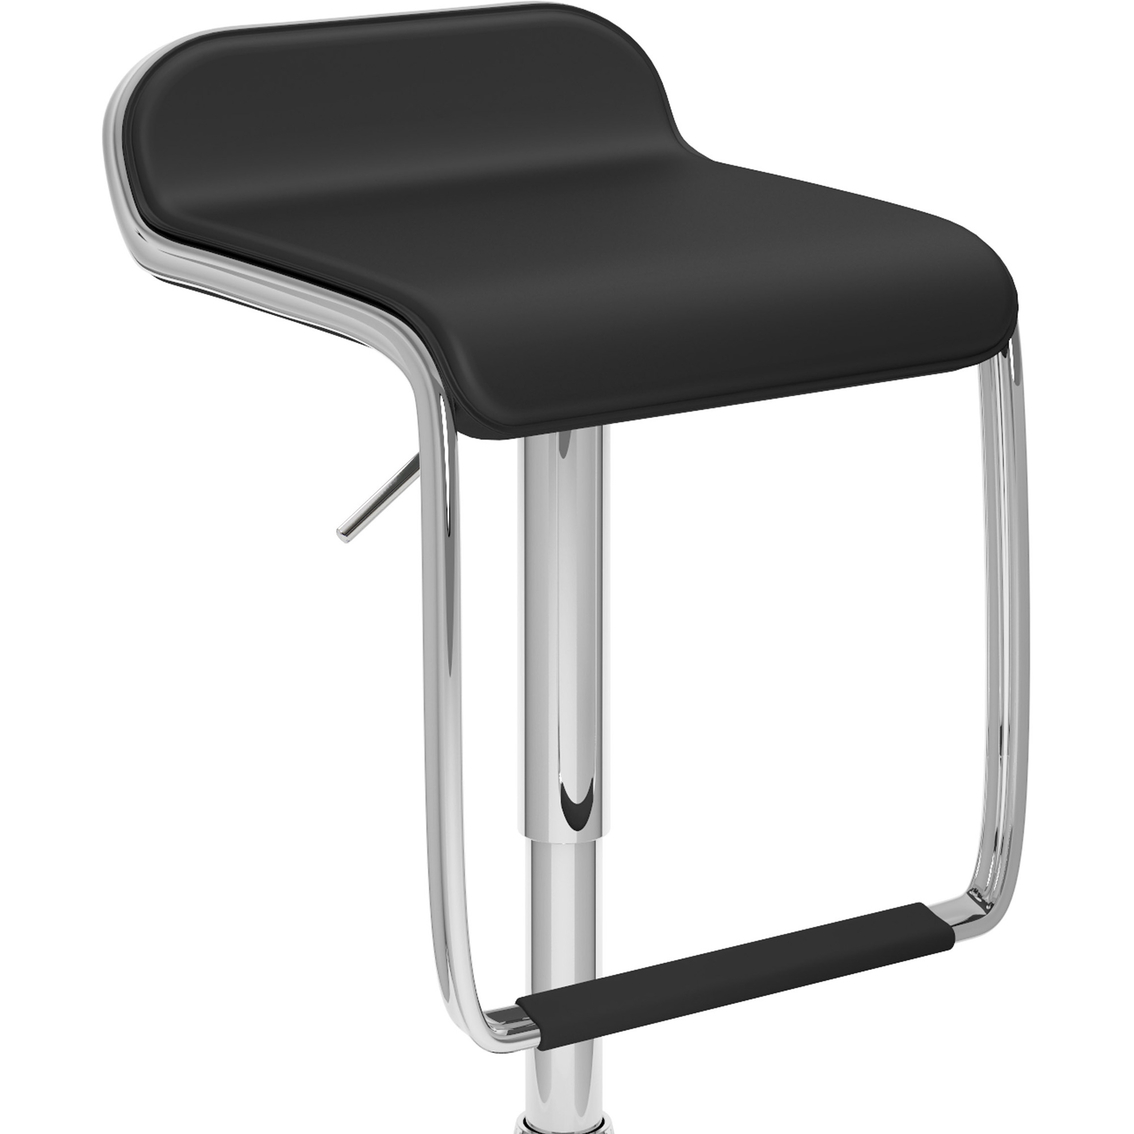 CorLiving Adjustable Barstool with Footrest 2 pk. - Image 8 of 10